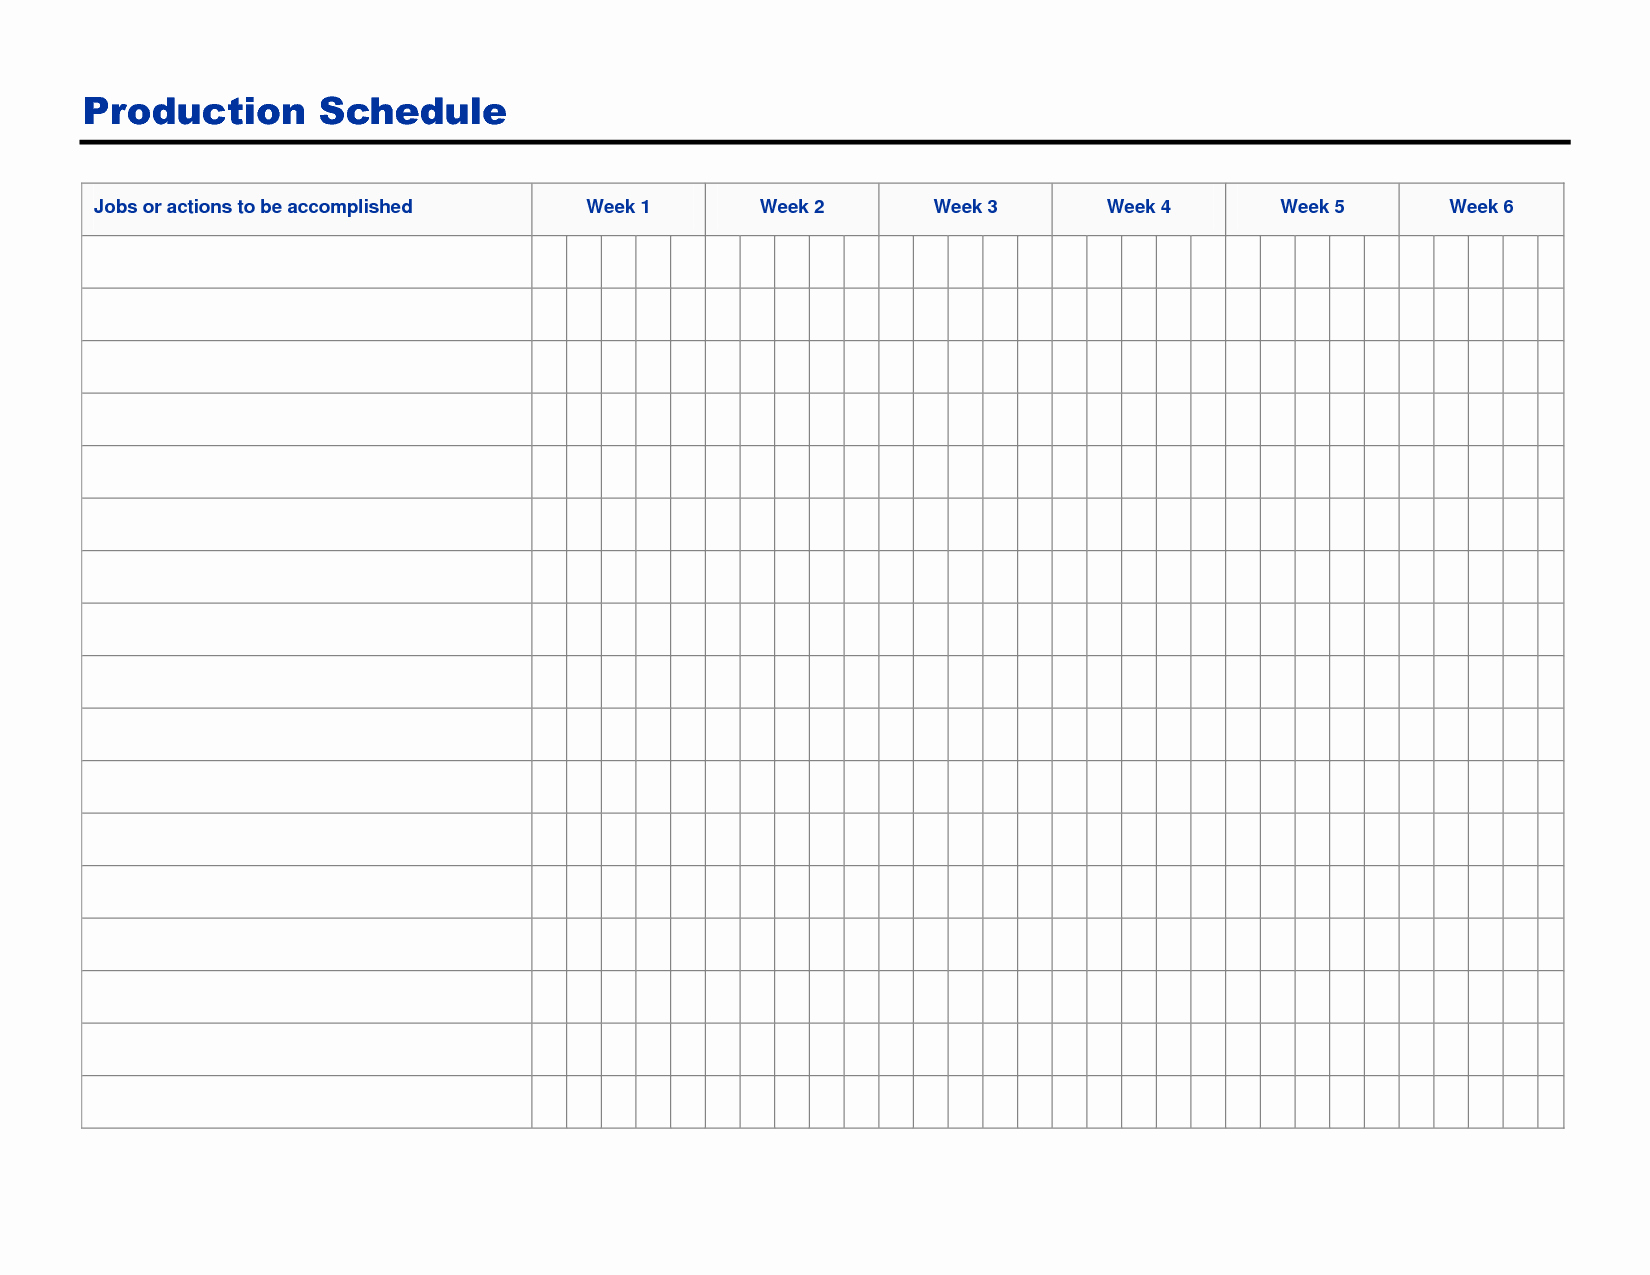 Production Schedule Excel Template New Free Printable Production Schedule Template and Sheet